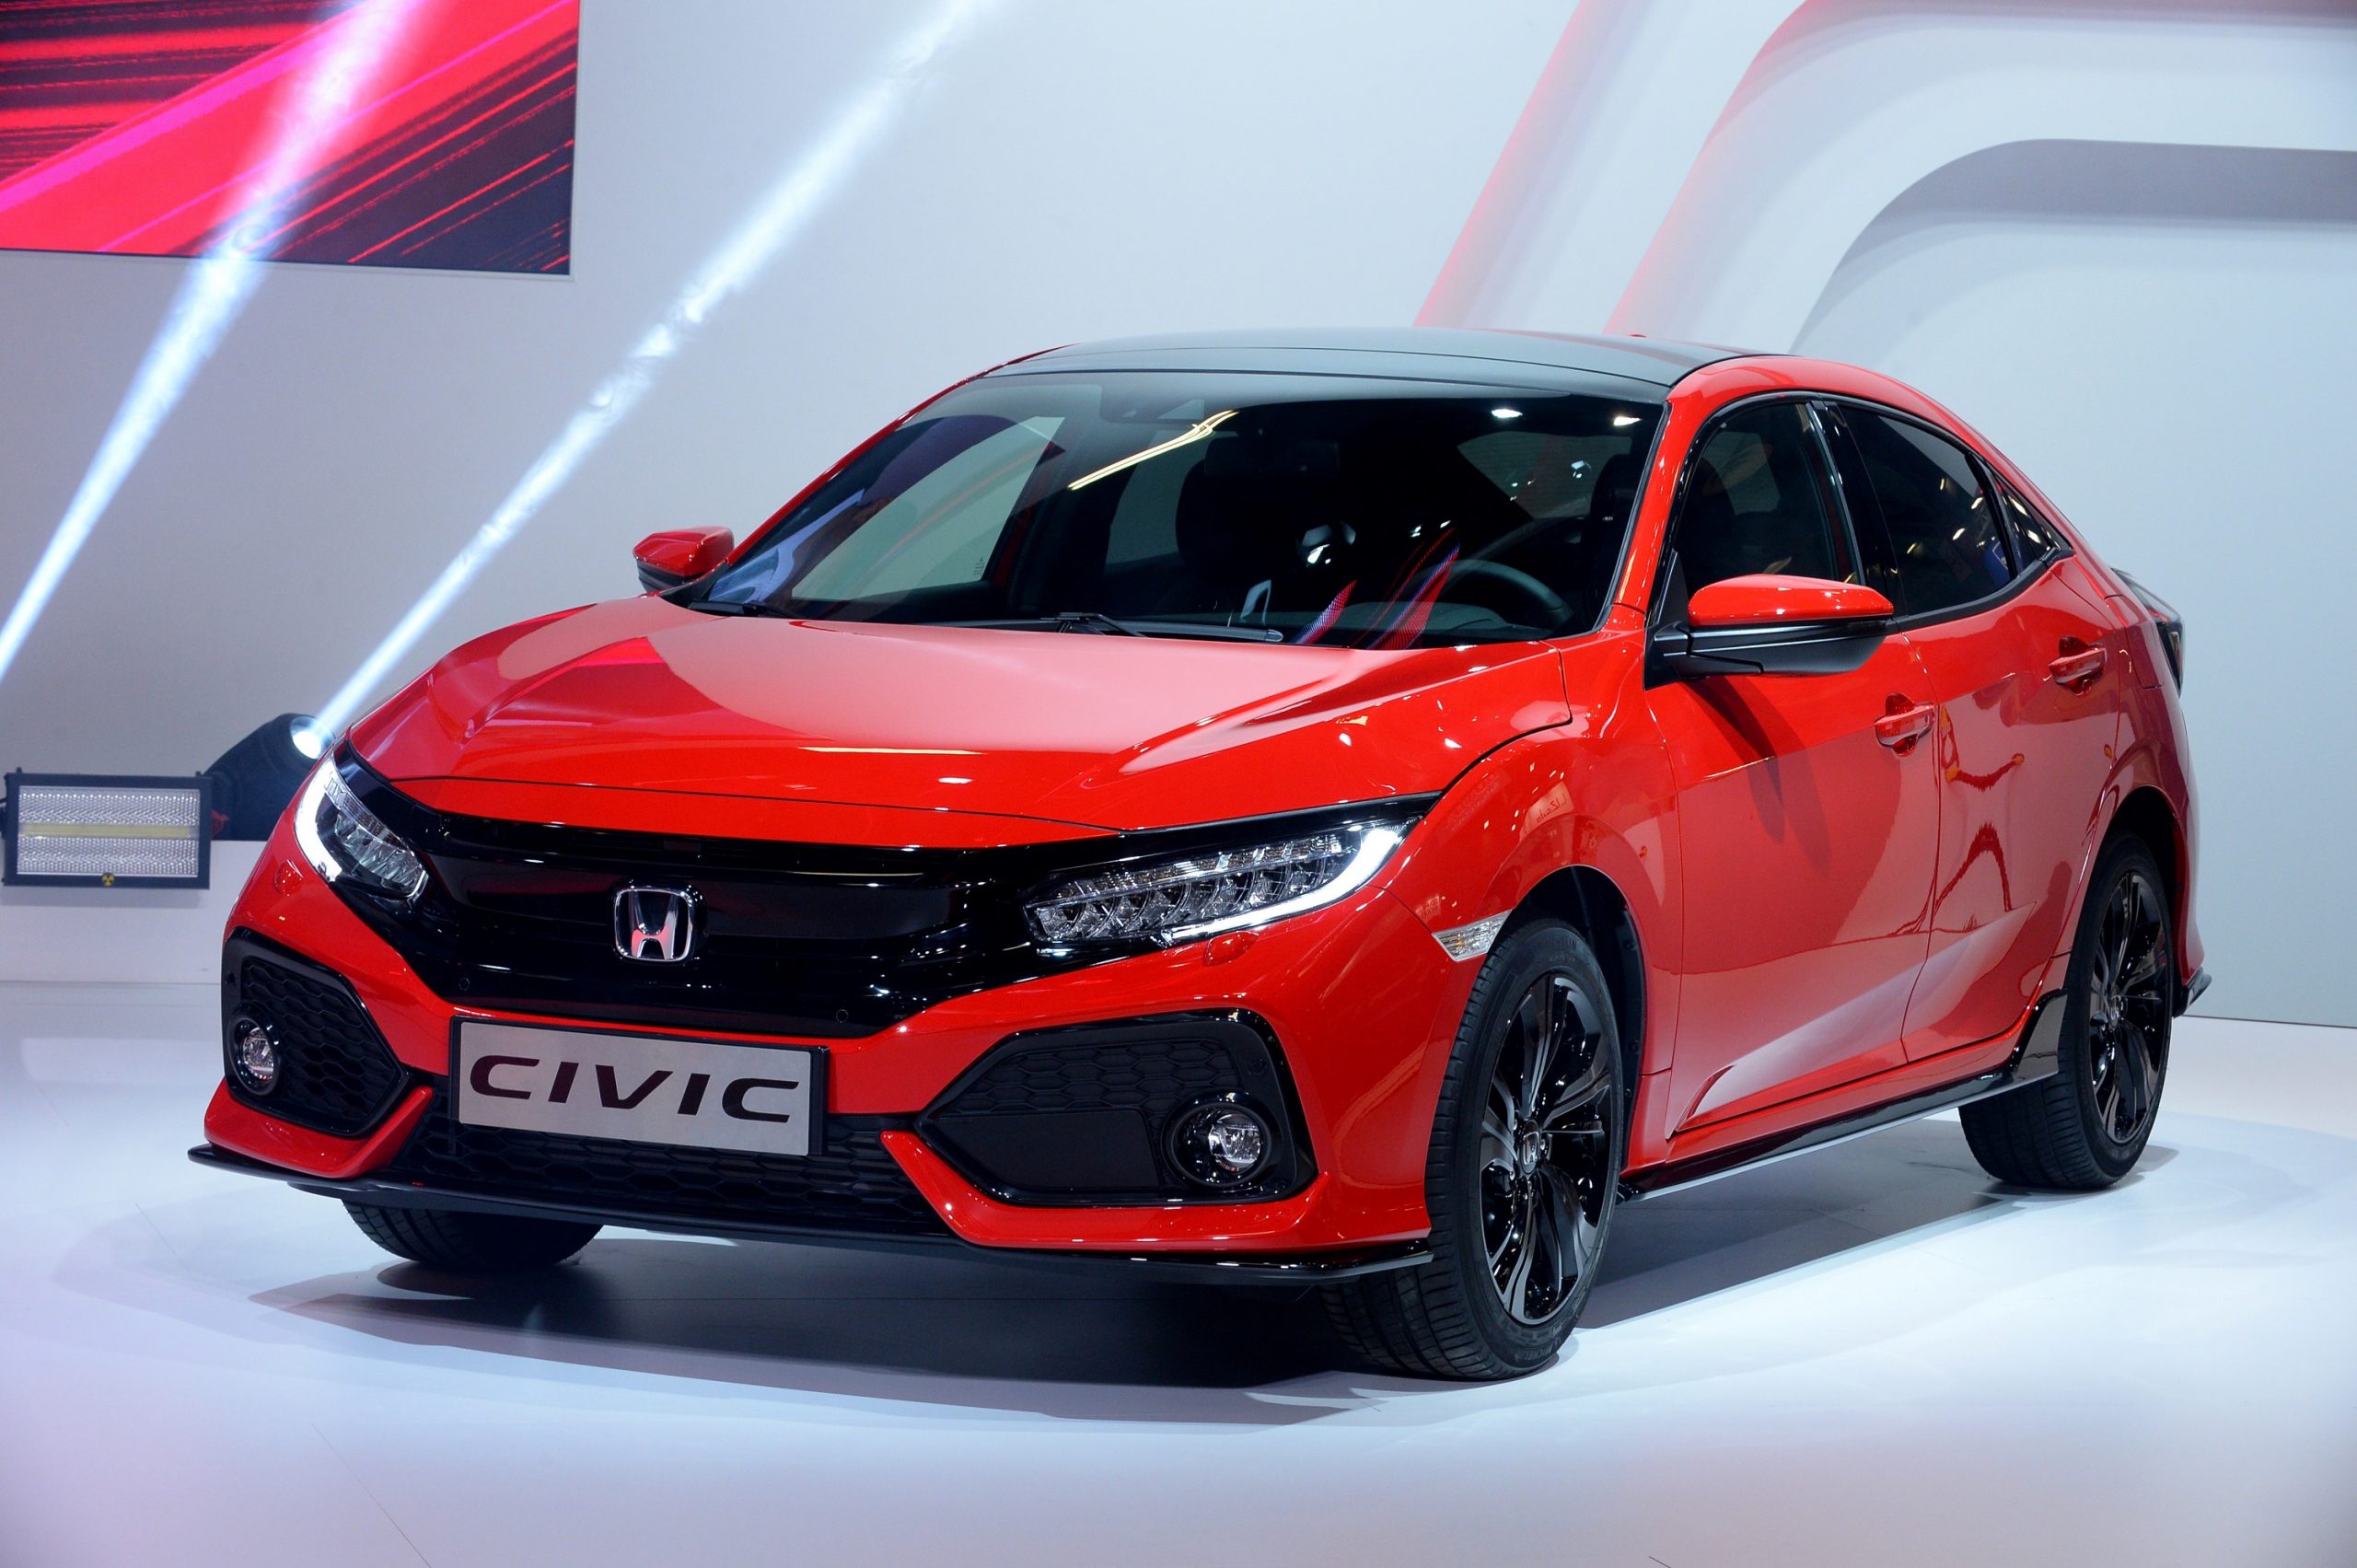 A red Honda Civic, voted one of the best used cars for 2022, seen here in a photo booth